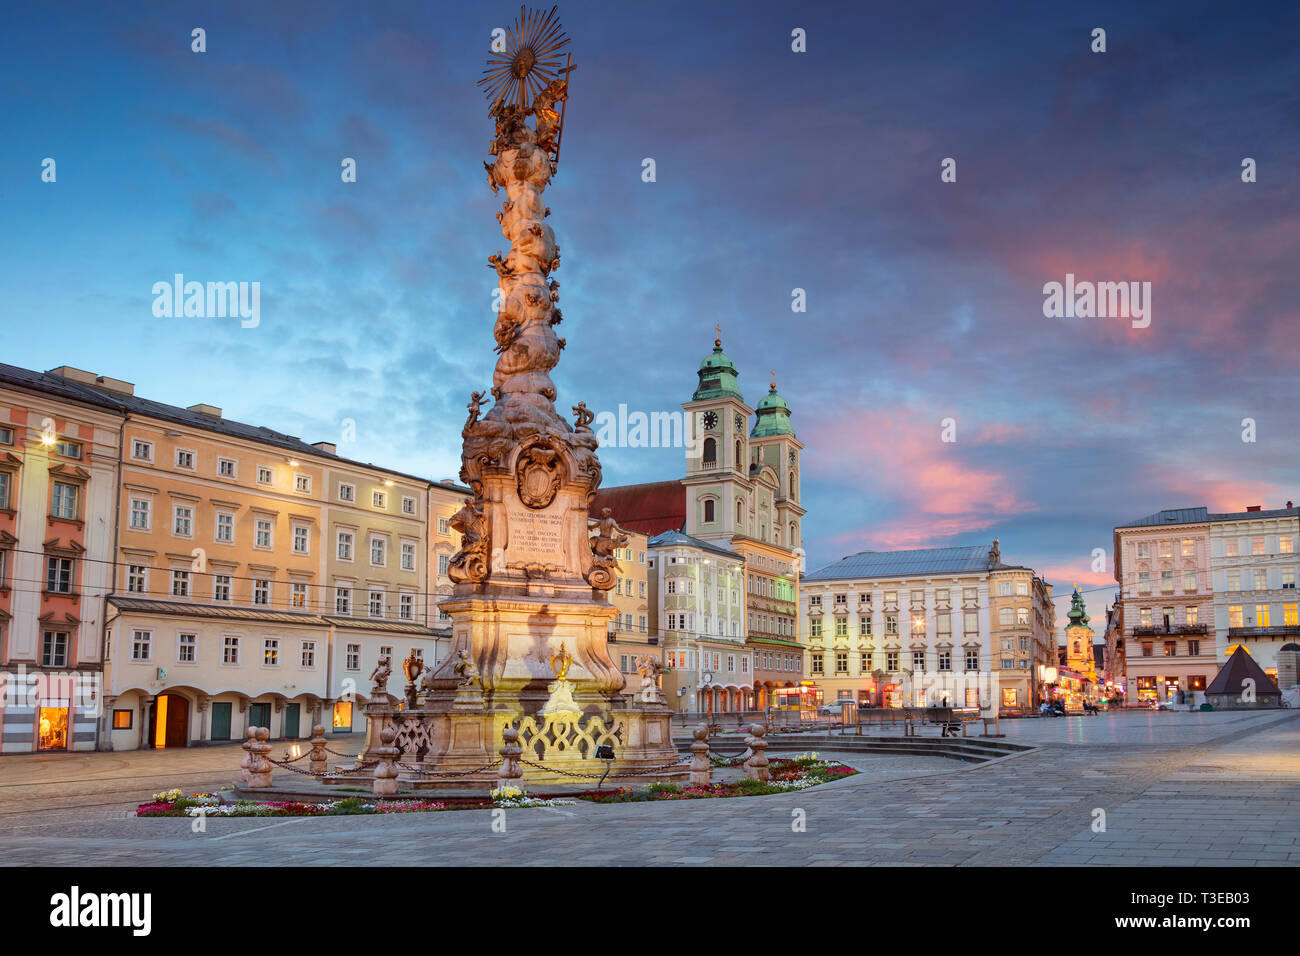 Linz, Austria. Cityscape image of main square of Linz, Austria during sunset. Stock Photo